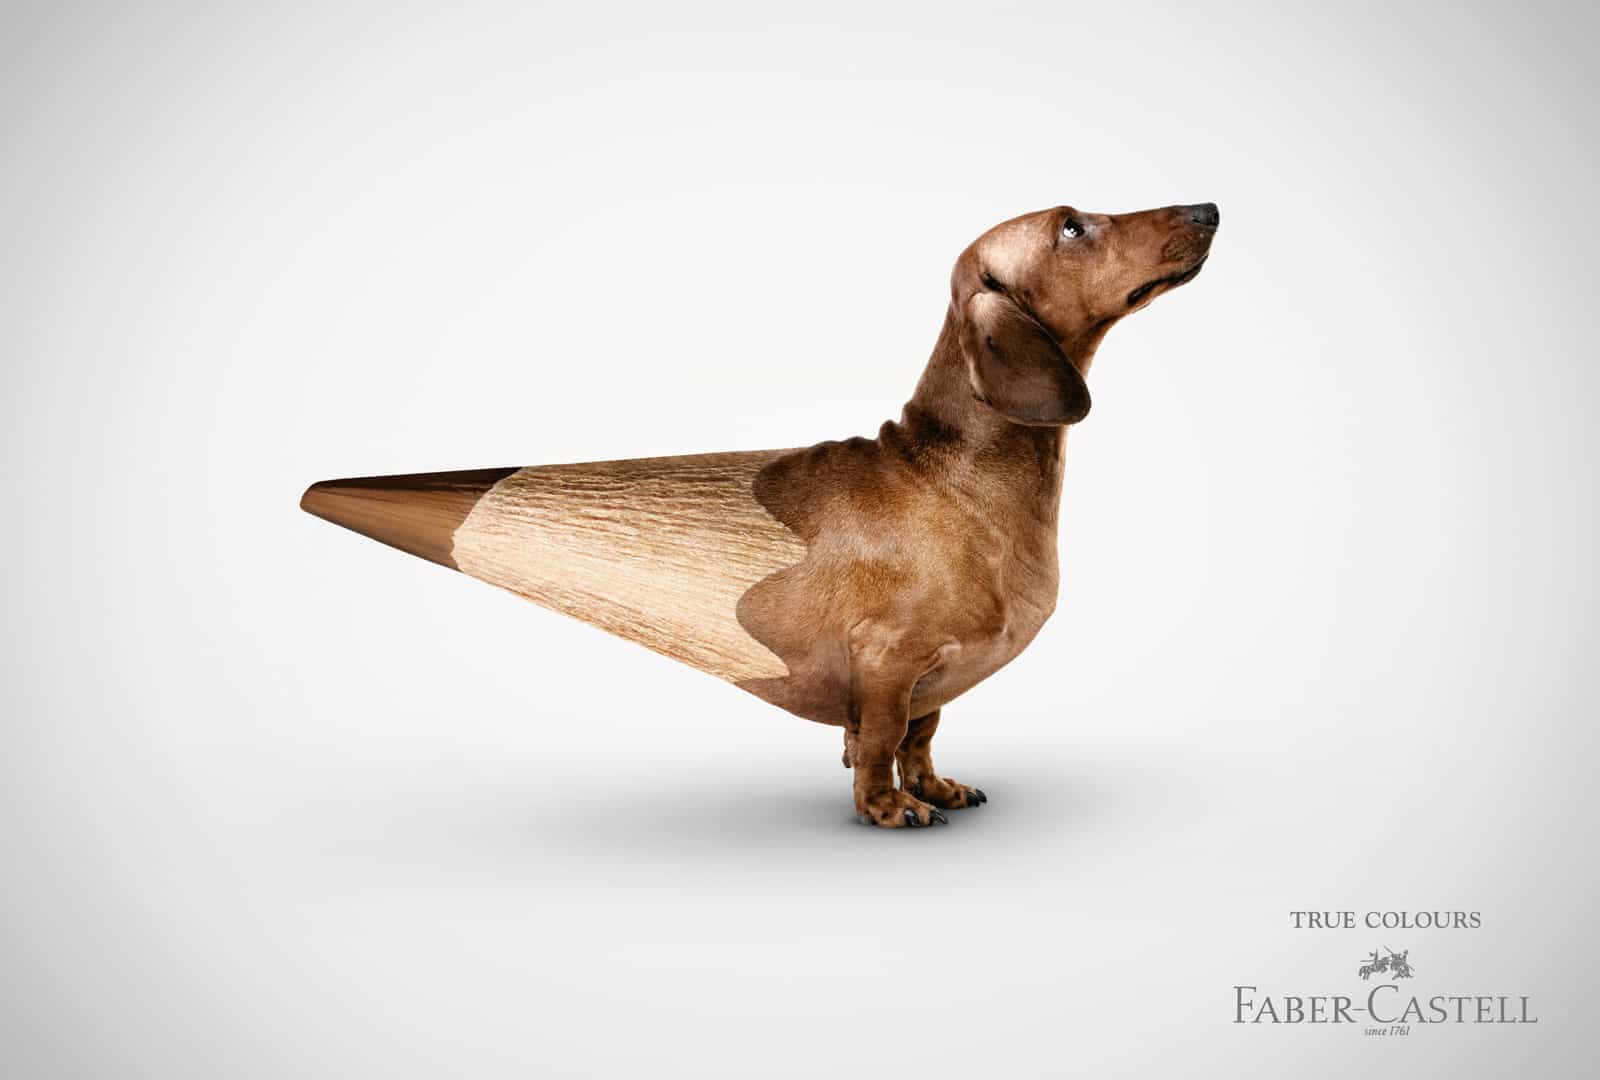 The Timeless Brilliance of Faber-Castell’s «True Colours» Advertising Campaign